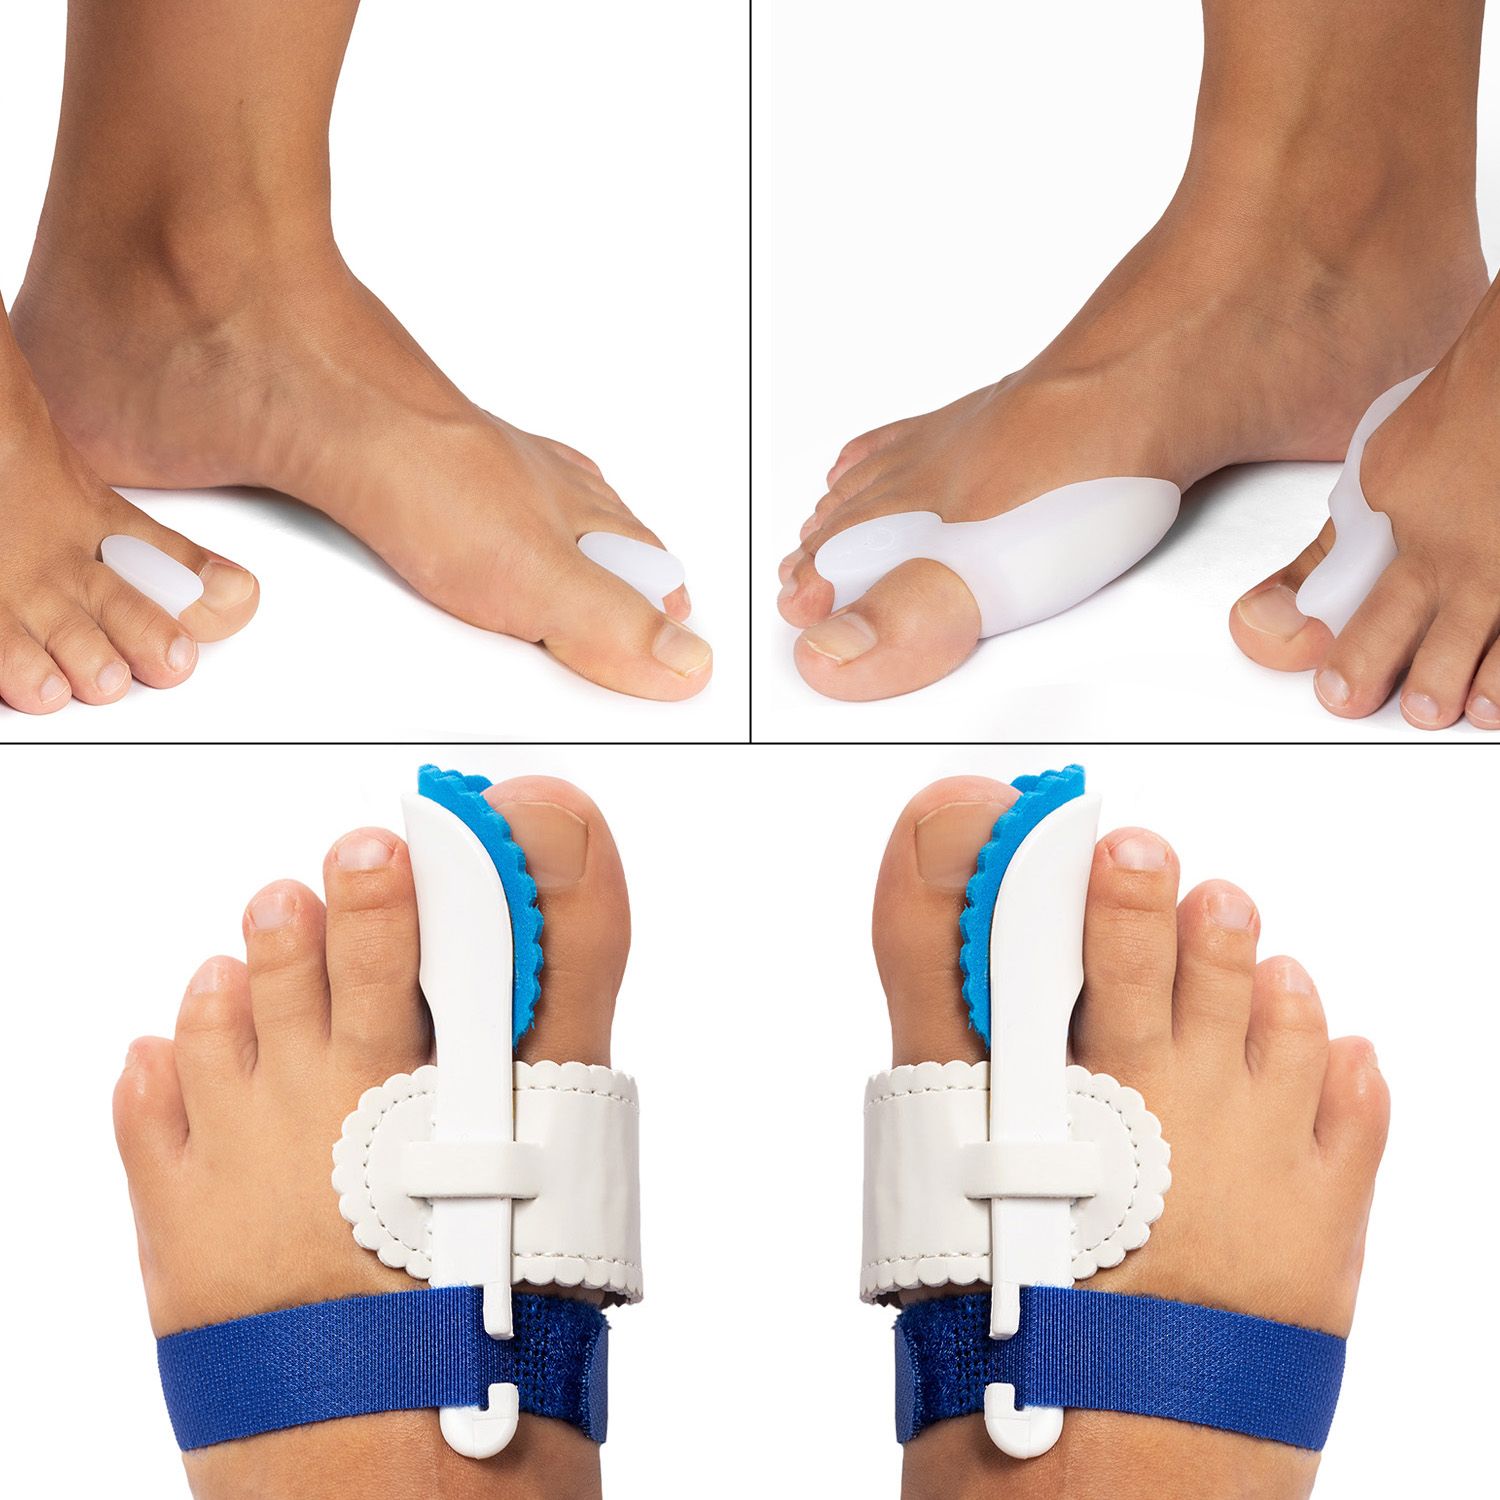 hallux valgus advantage package all products pictured